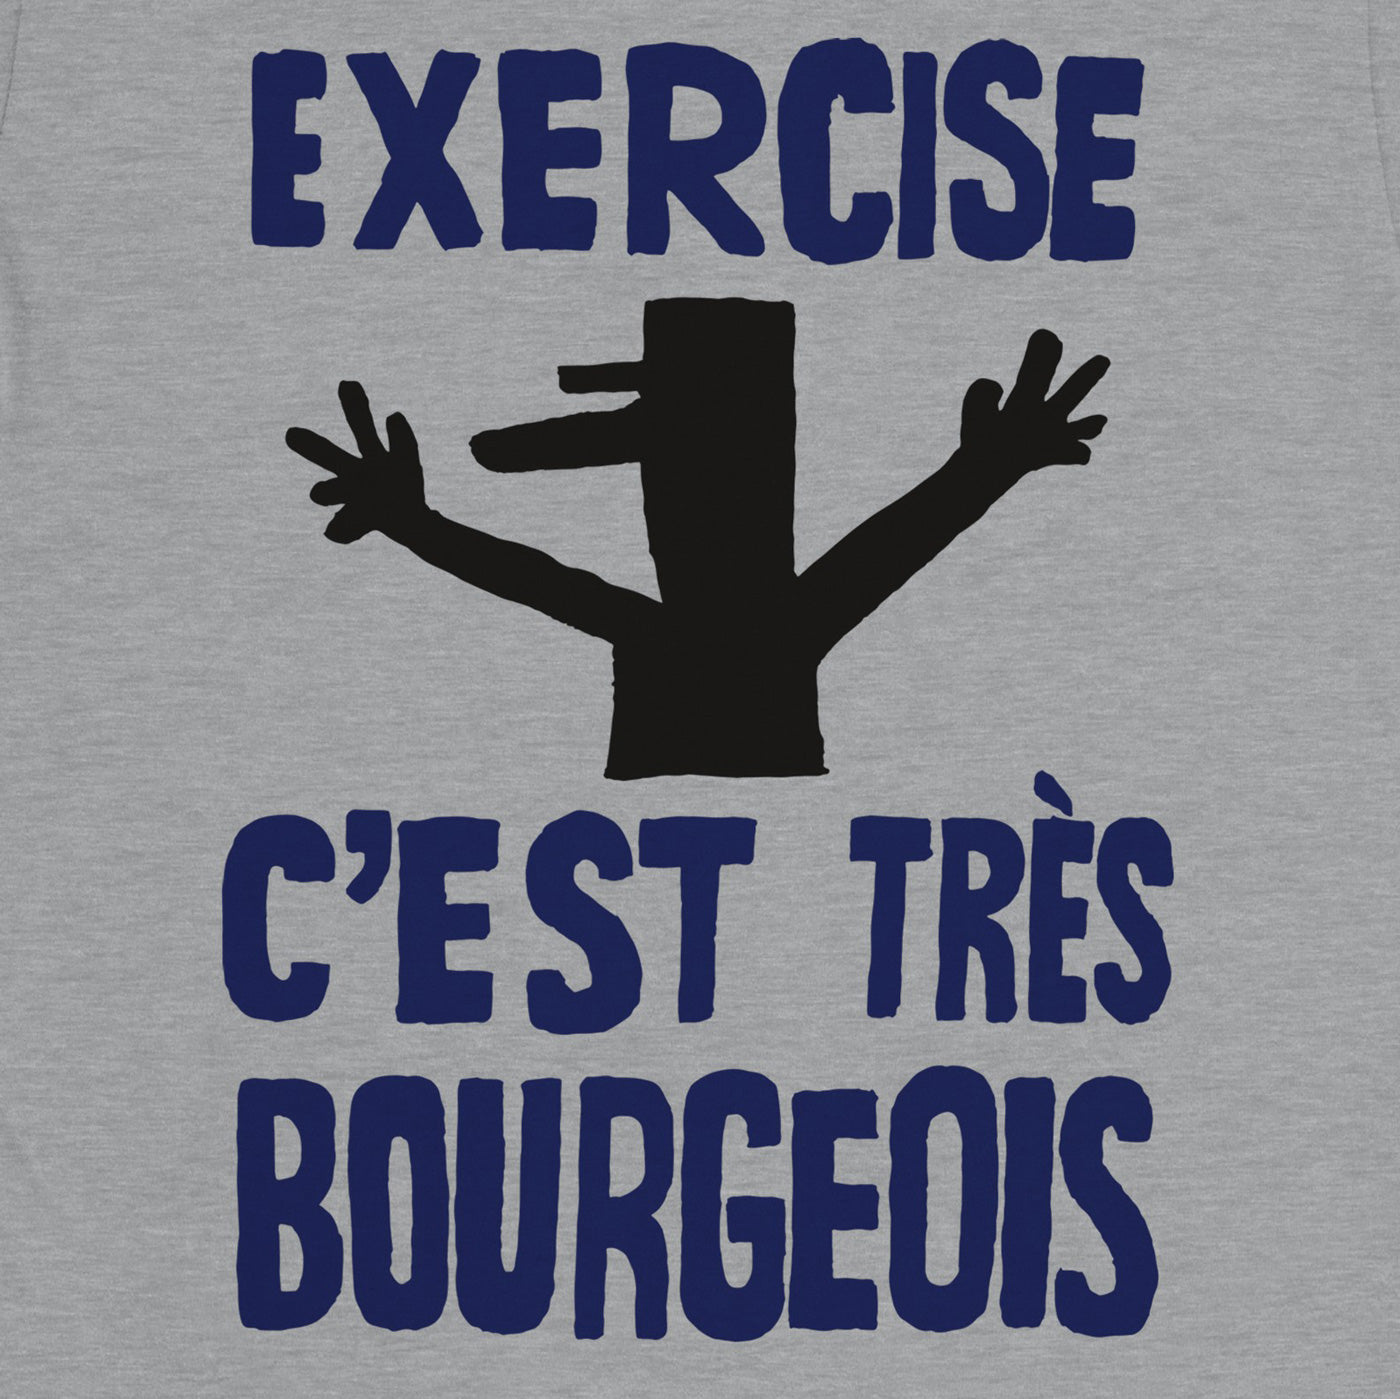 1968 Paris Protest Inspired T-Shirt with Charles de Gaulle Illustration and 'Exercise, c'est très bourgeois' Text